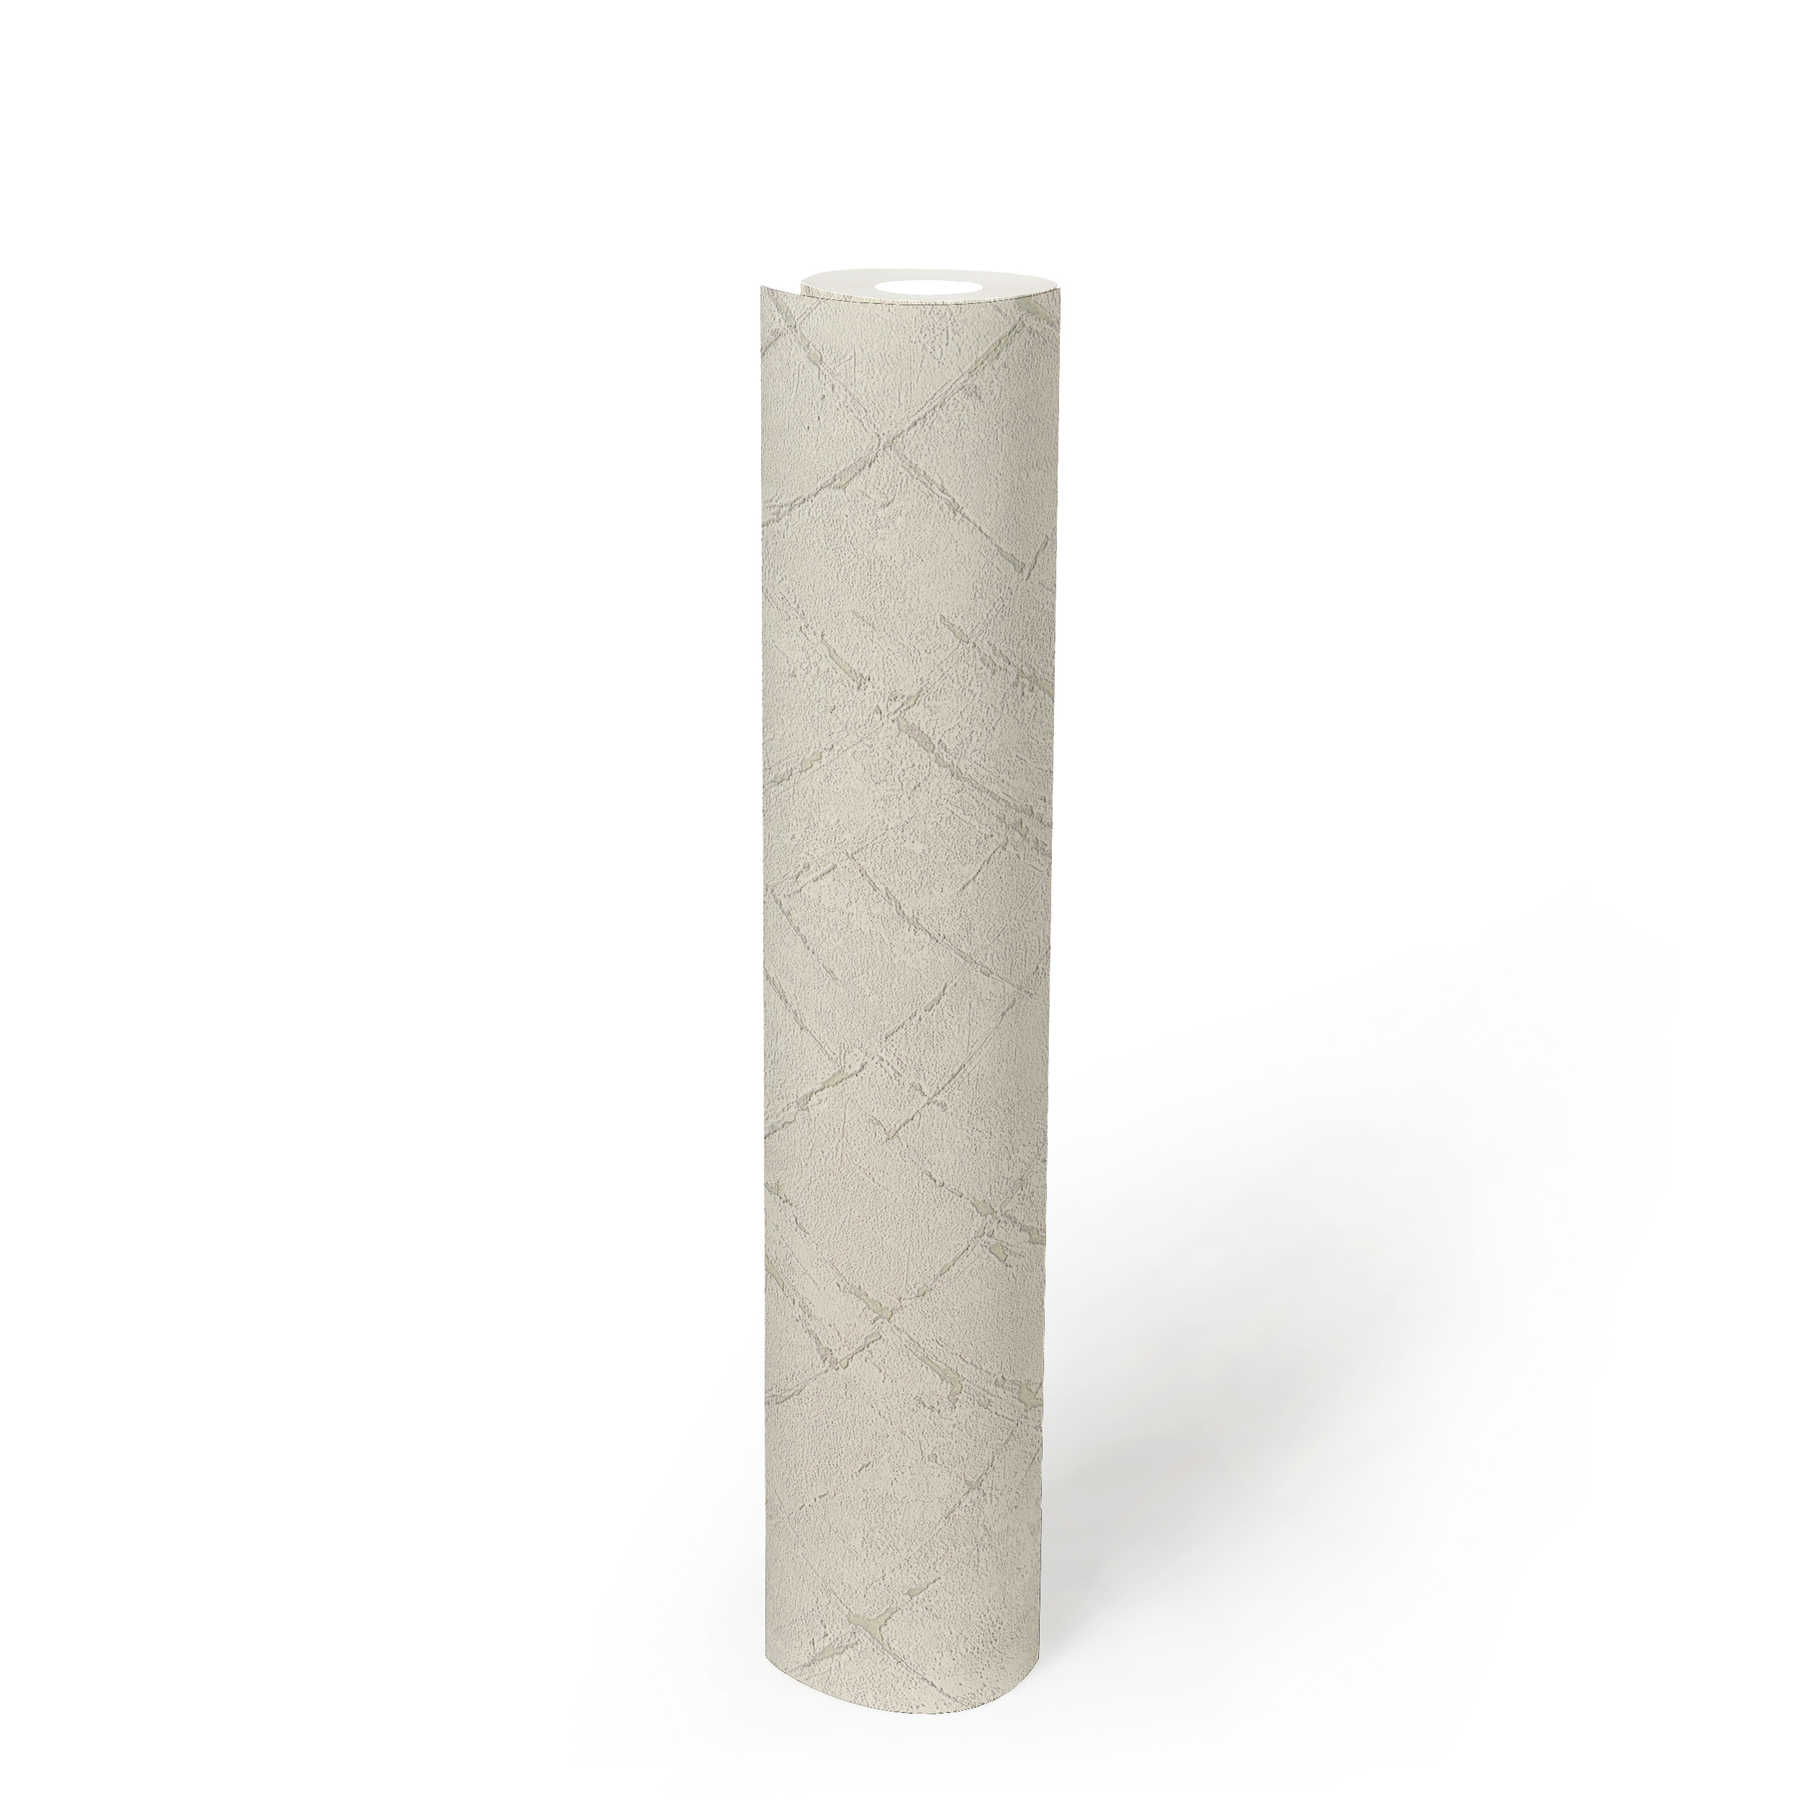             Non-woven wallpaper plaster look in used look - white, grey
        